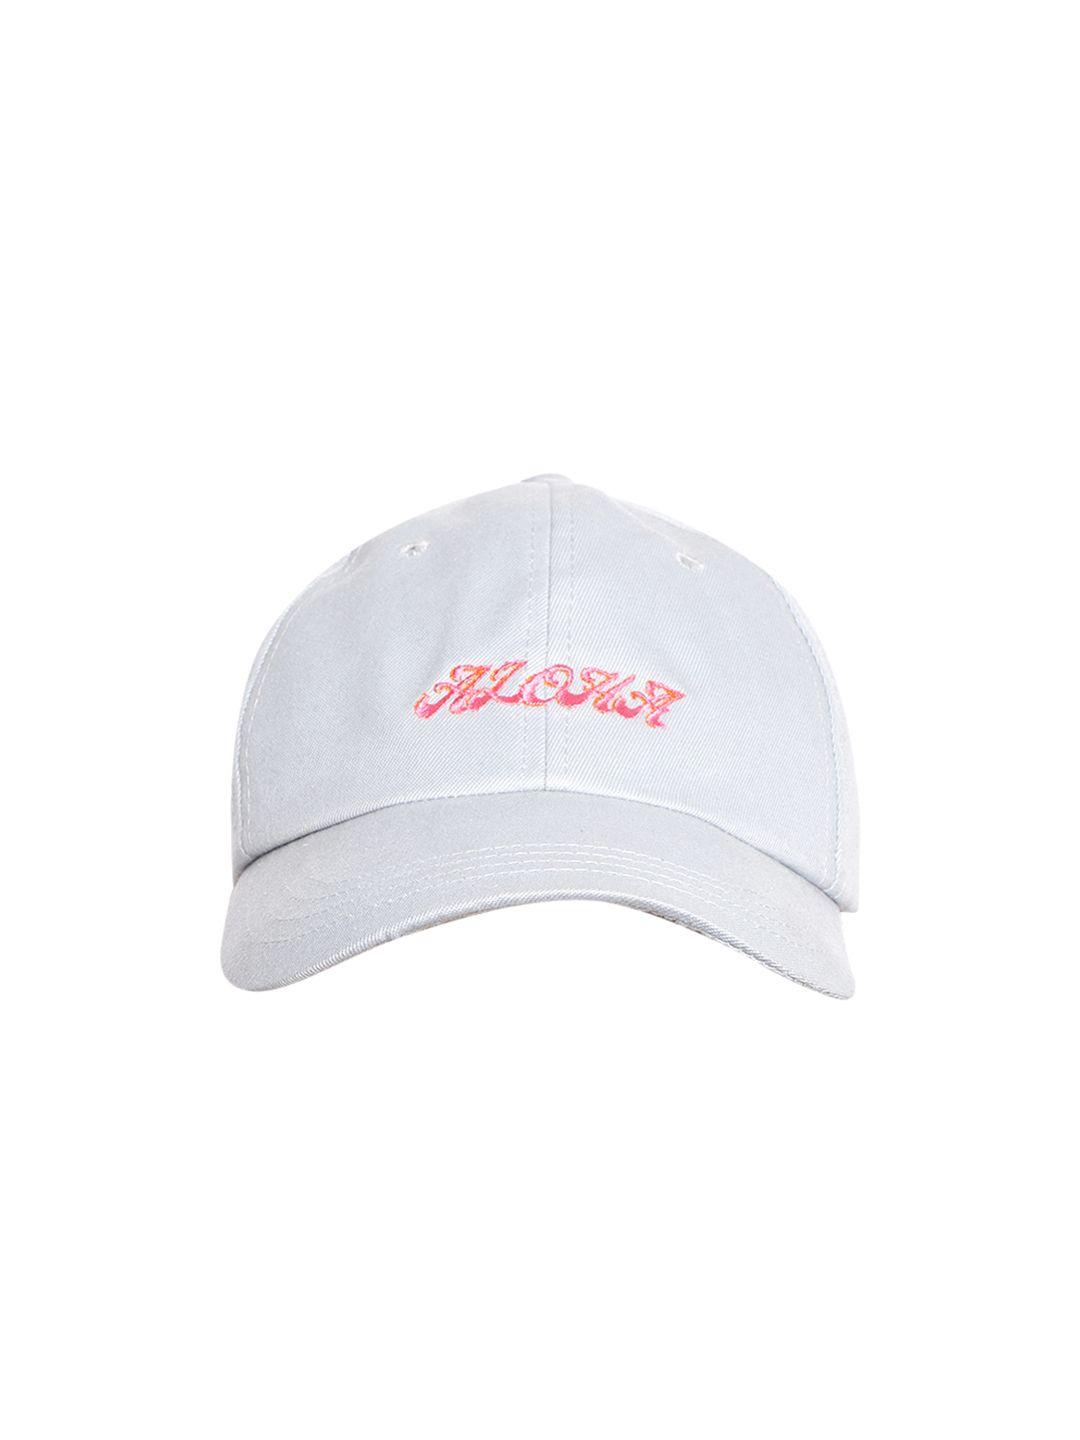 blueberry unisex grey & red embroidered baseball cap